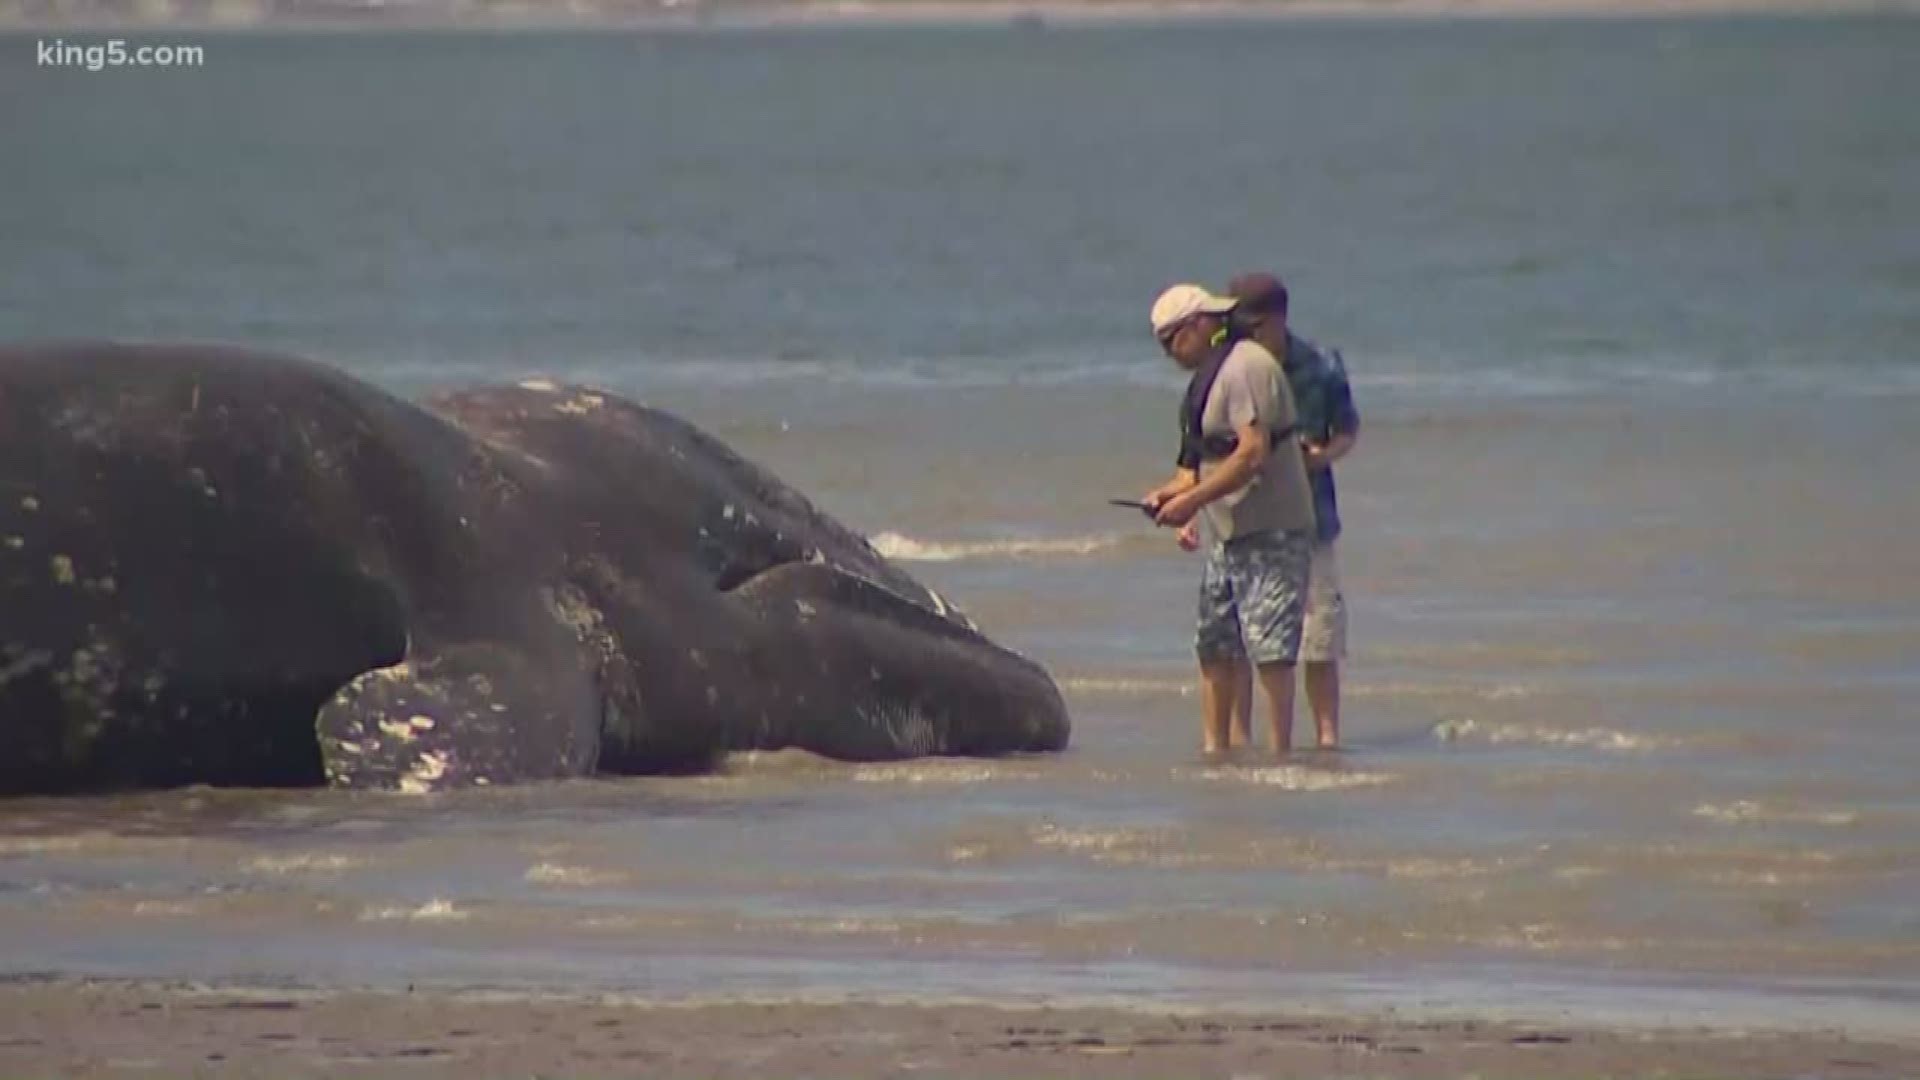 Right now, wildlife experts are investigating after a gray whale was found dead in Everett. It washed ashore this weekend near Harborview Park, the 13th whaled found dead on Washington's coast already this year. KING 5's Michael Crowe reports.